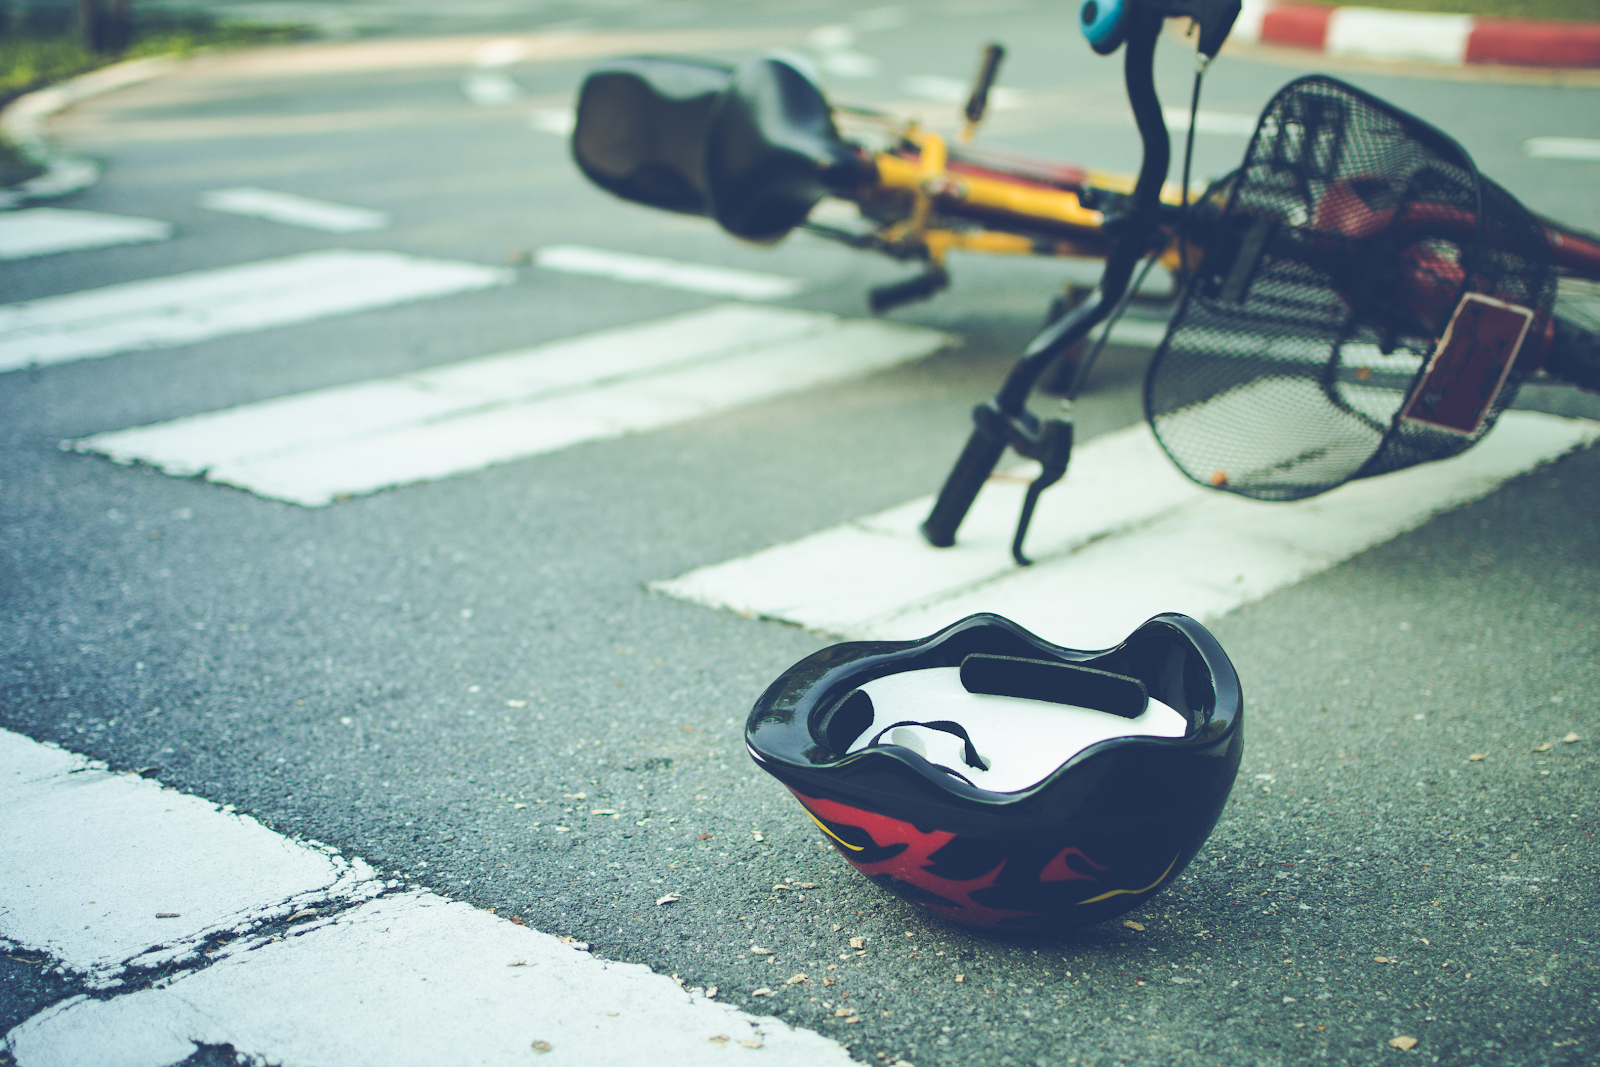 injured bicyclist in a bicycle accident in silver spring, bicycle car accidents occur frequently in intersections